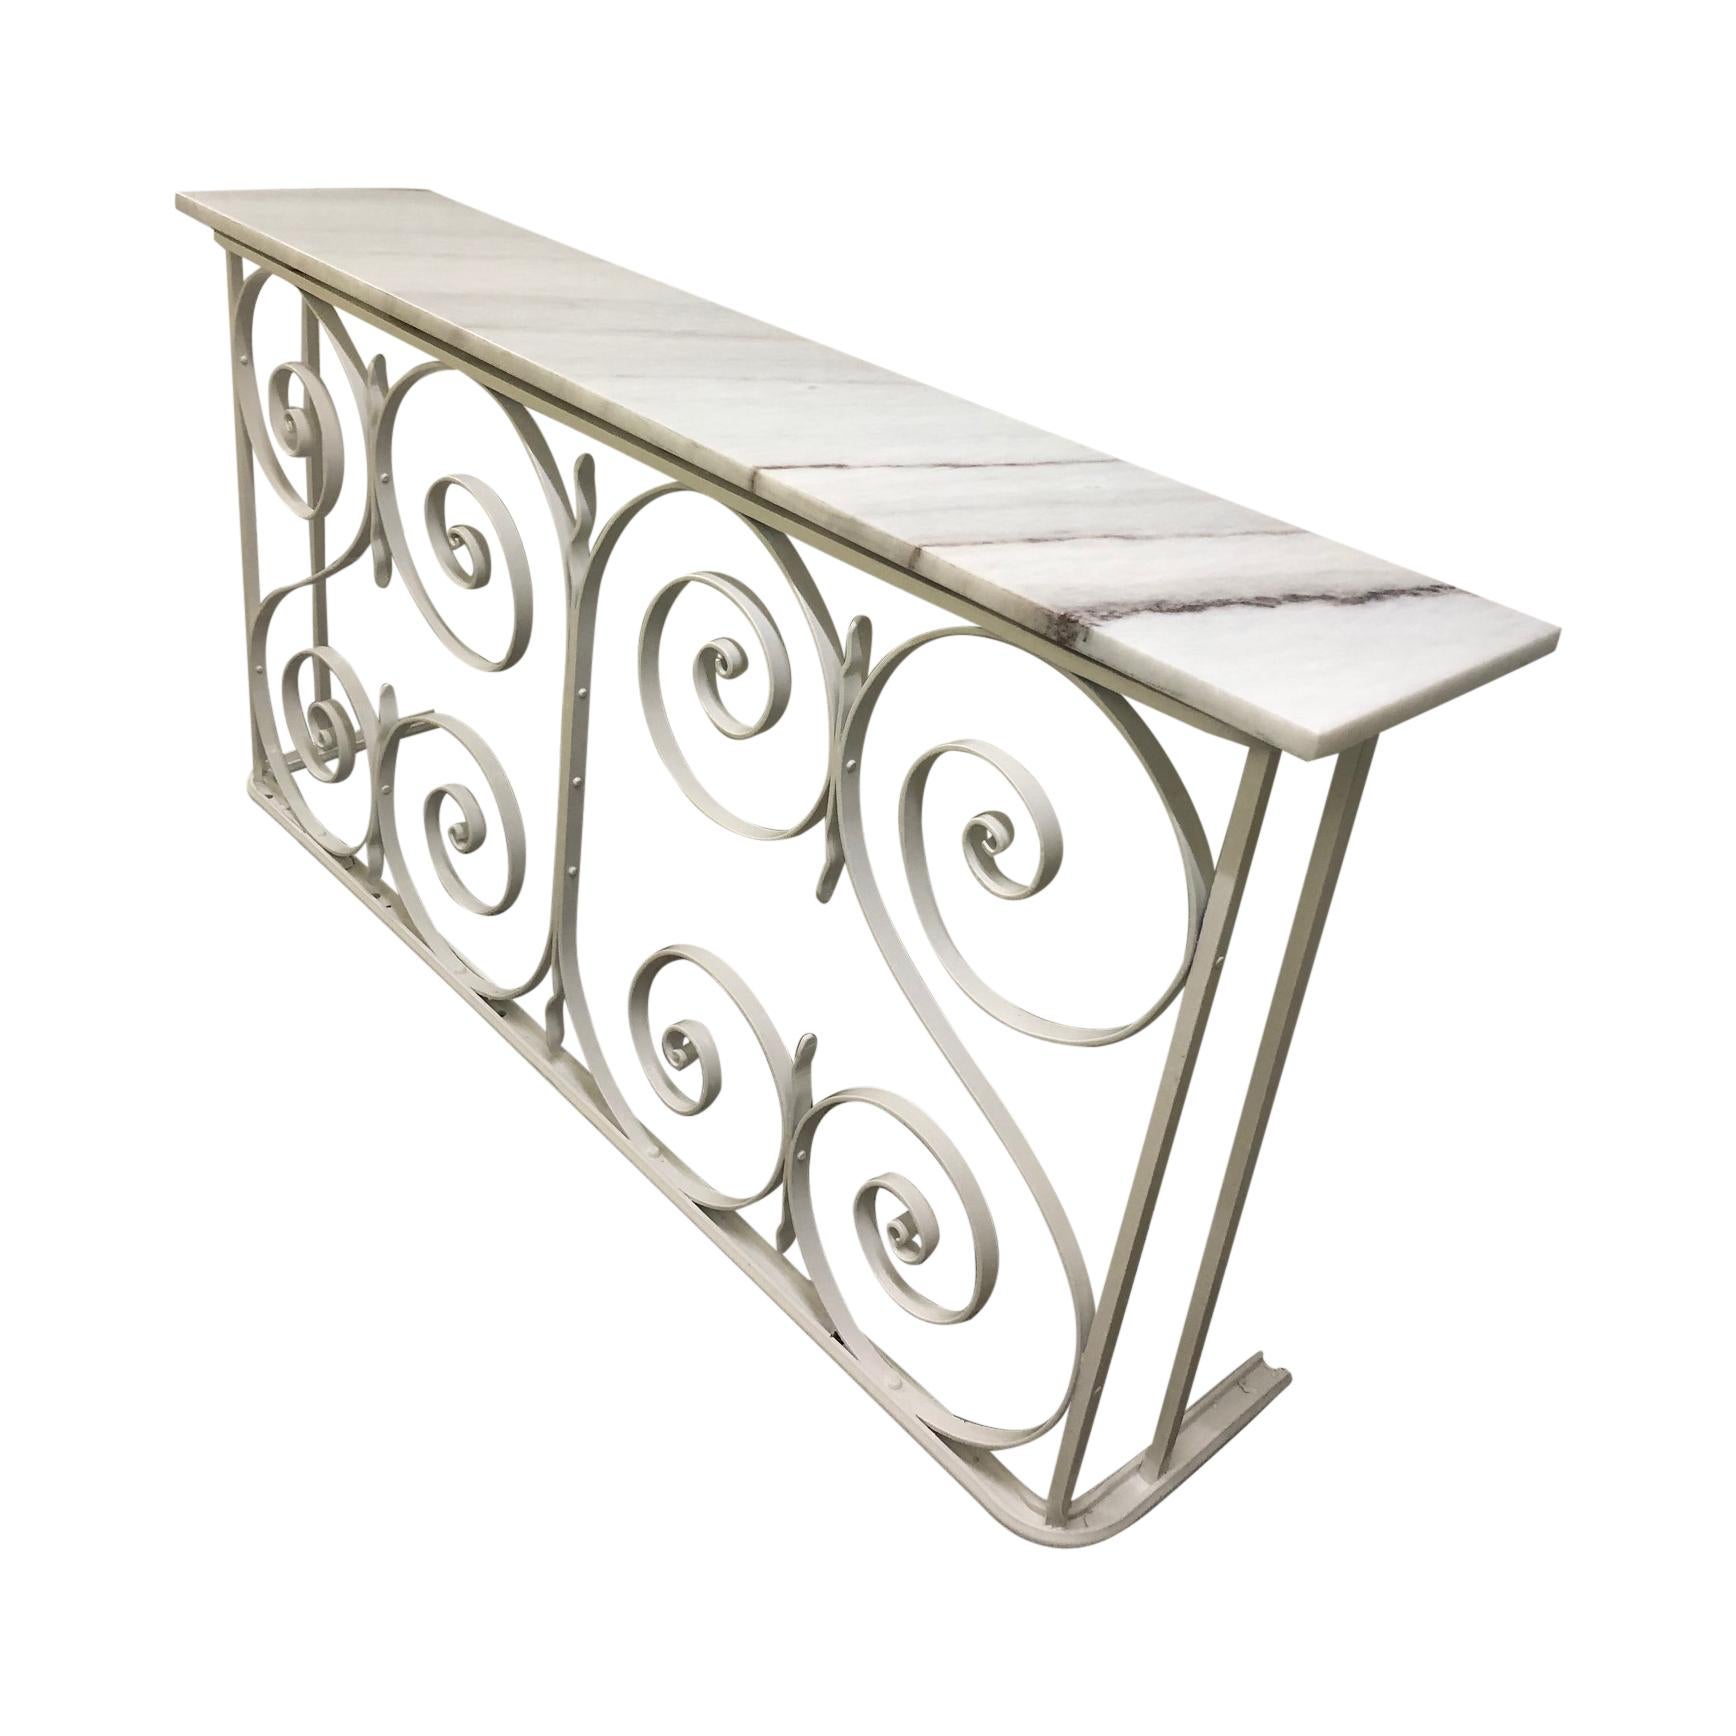 Forged 1950's restored Balcony Rail Console Table and Italian white Dolomite Marble top For Sale